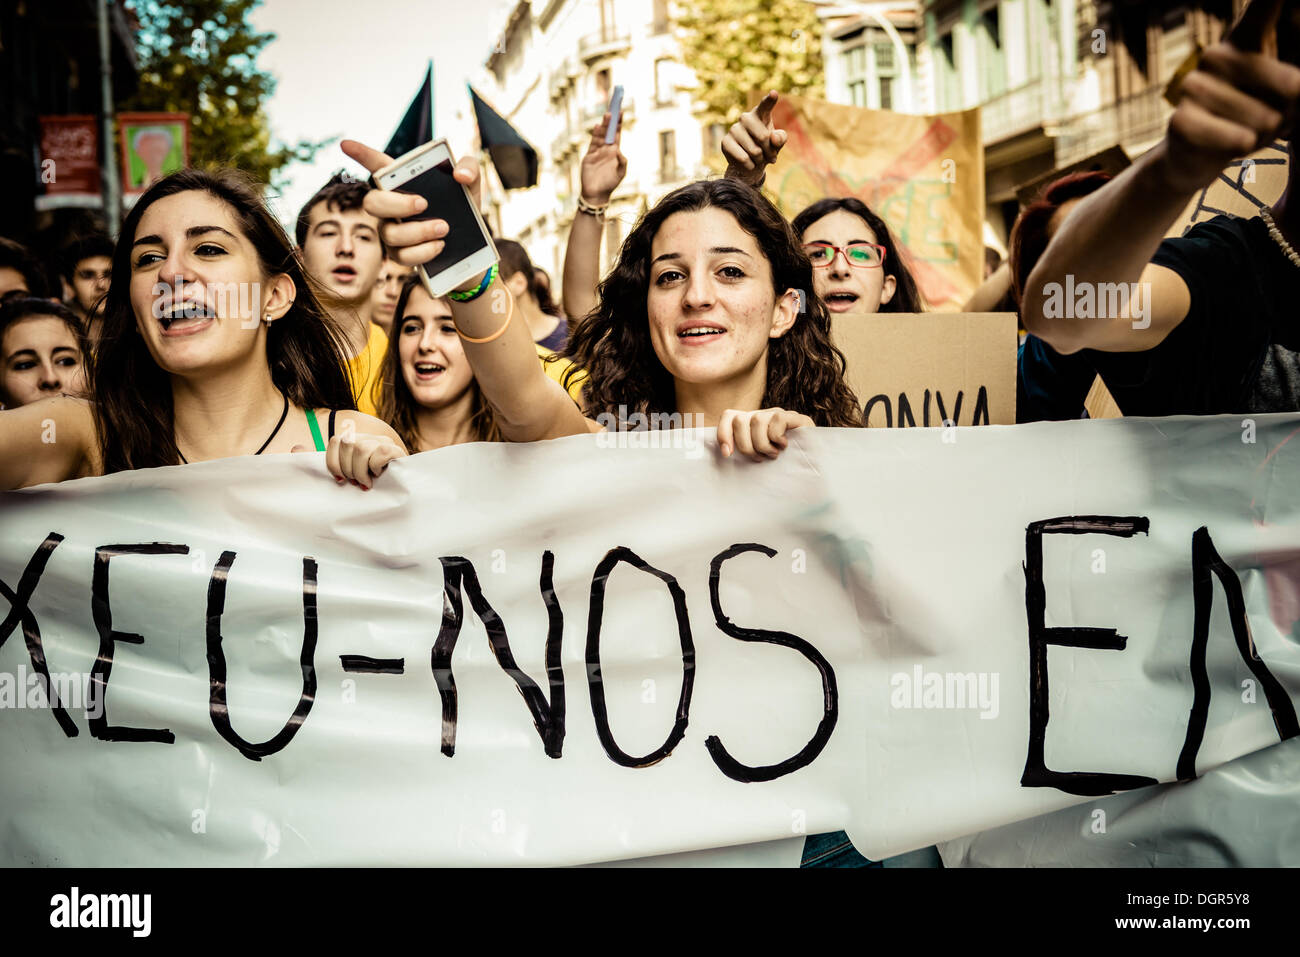 Barcelona, Spain. October 24th, 2013: Students protesting against austerity measures and the 'law Wert' during a three day long education strike in Barcelona. © matthi/Alamy Live News Stock Photo